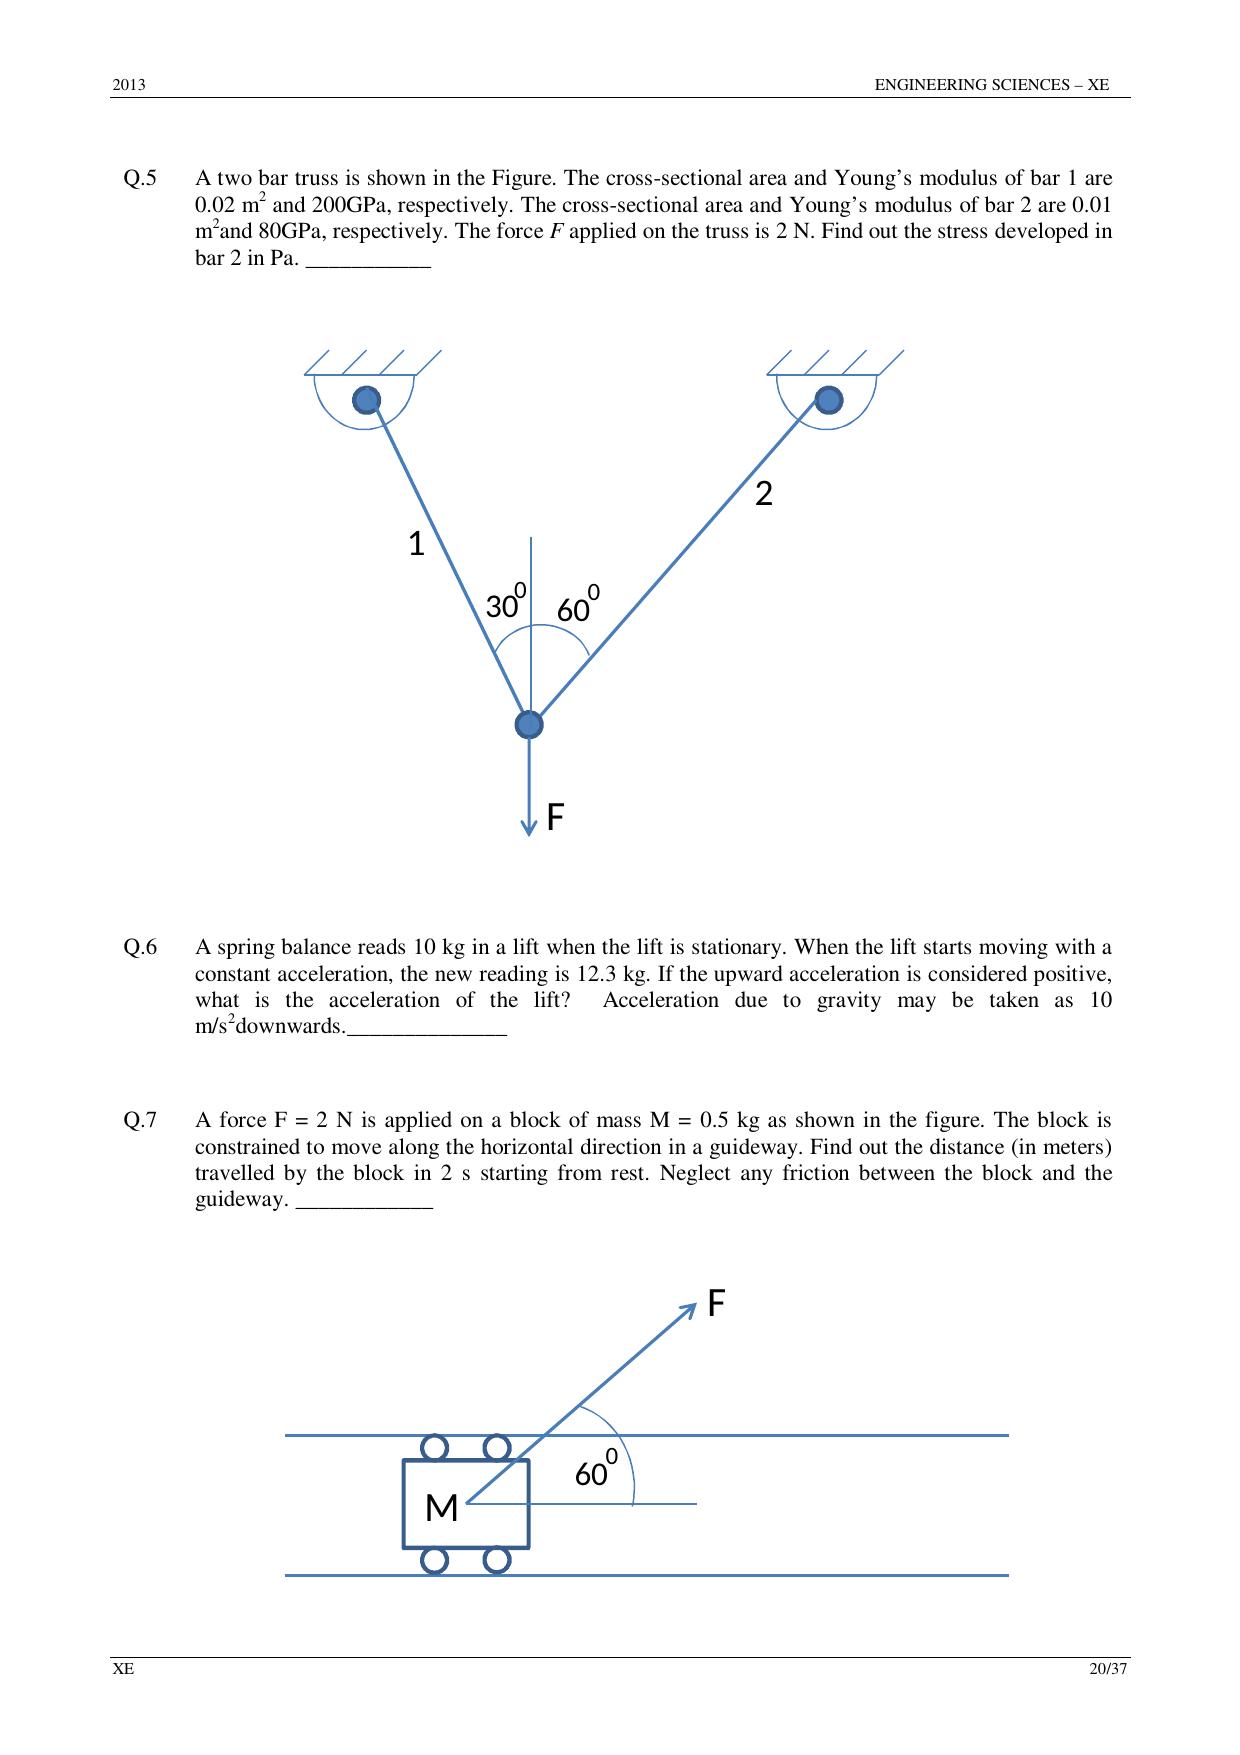 GATE 2013 Engineering Sciences (XE) Question Paper with Answer Key - Page 20